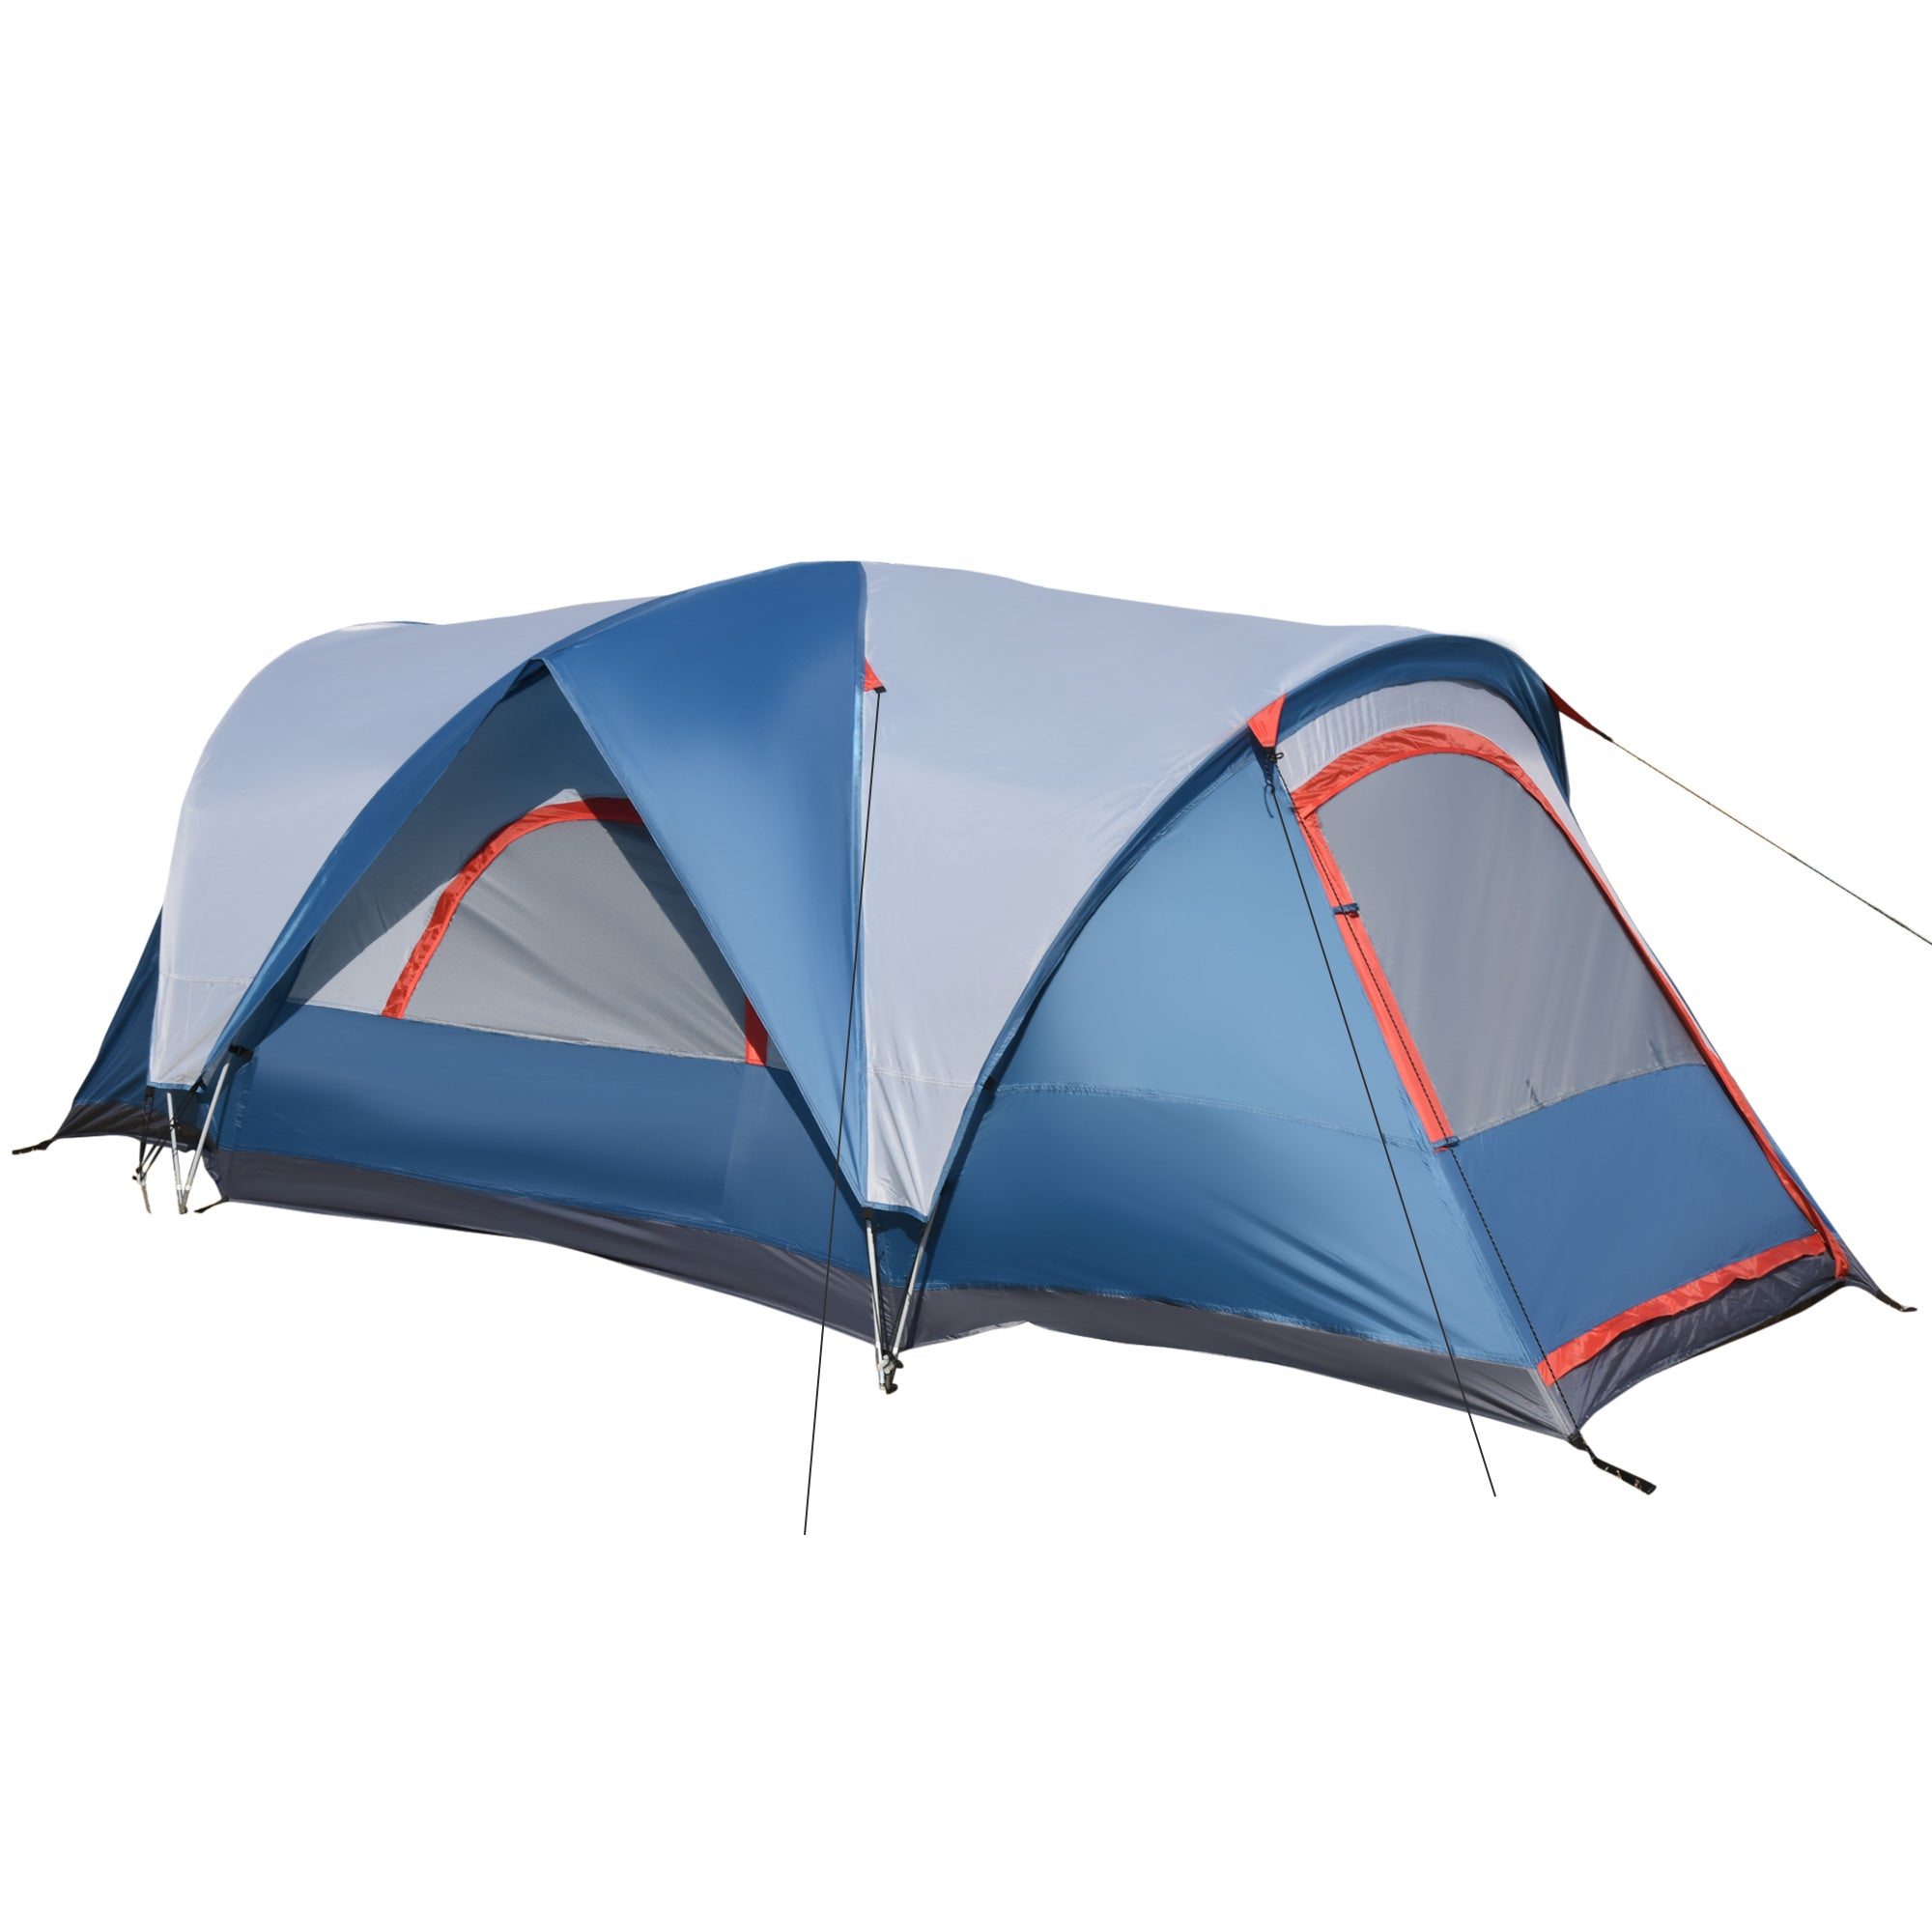 Outsunny 3-4 Persons Camping Tent w/ 2 Rooms - UV Protection - Water-Resistant  | TJ Hughes